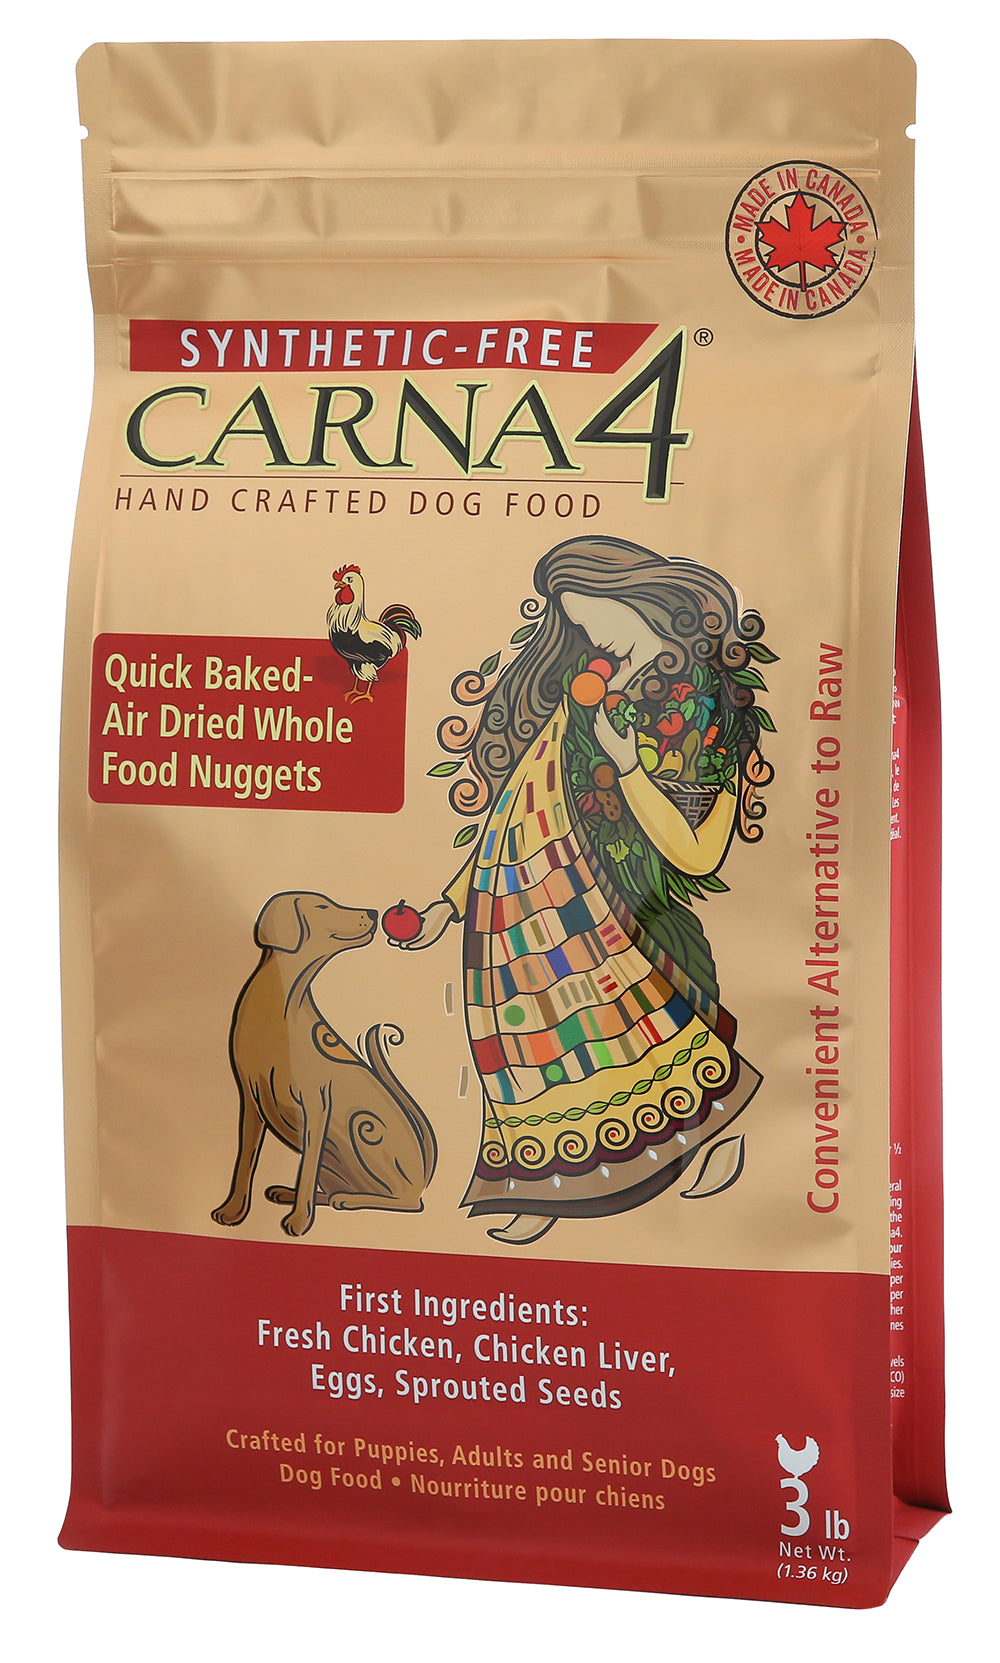 CARNA4 Handcrafted Dog Food Chicken Image